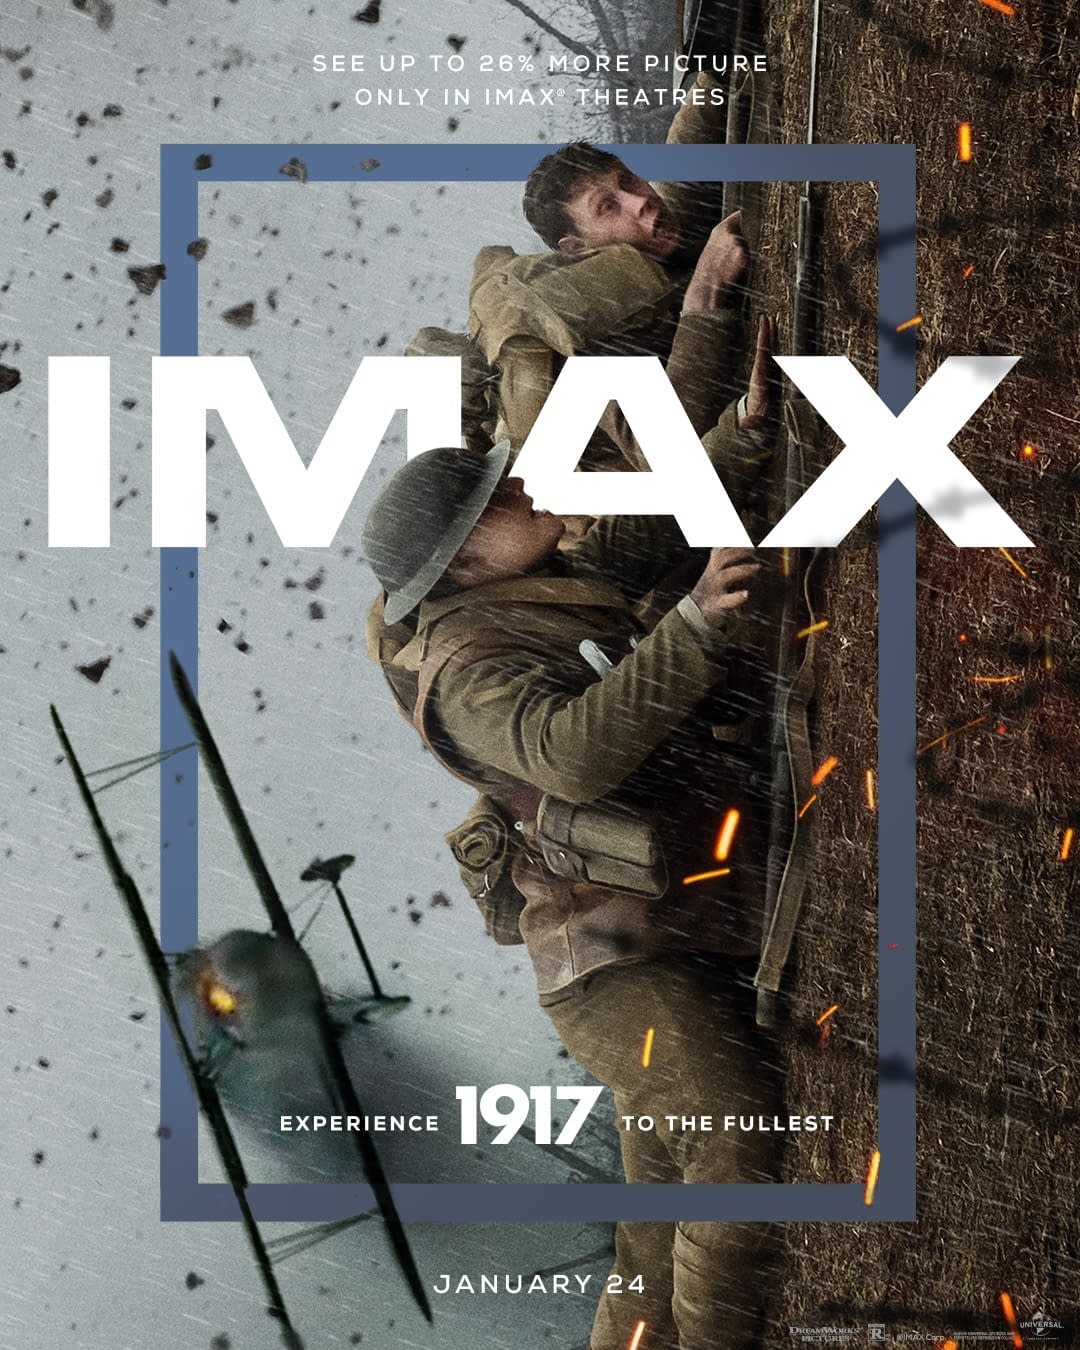 New Trailer and Poster for "1917" Show Desperate Men on a Desperate Mission